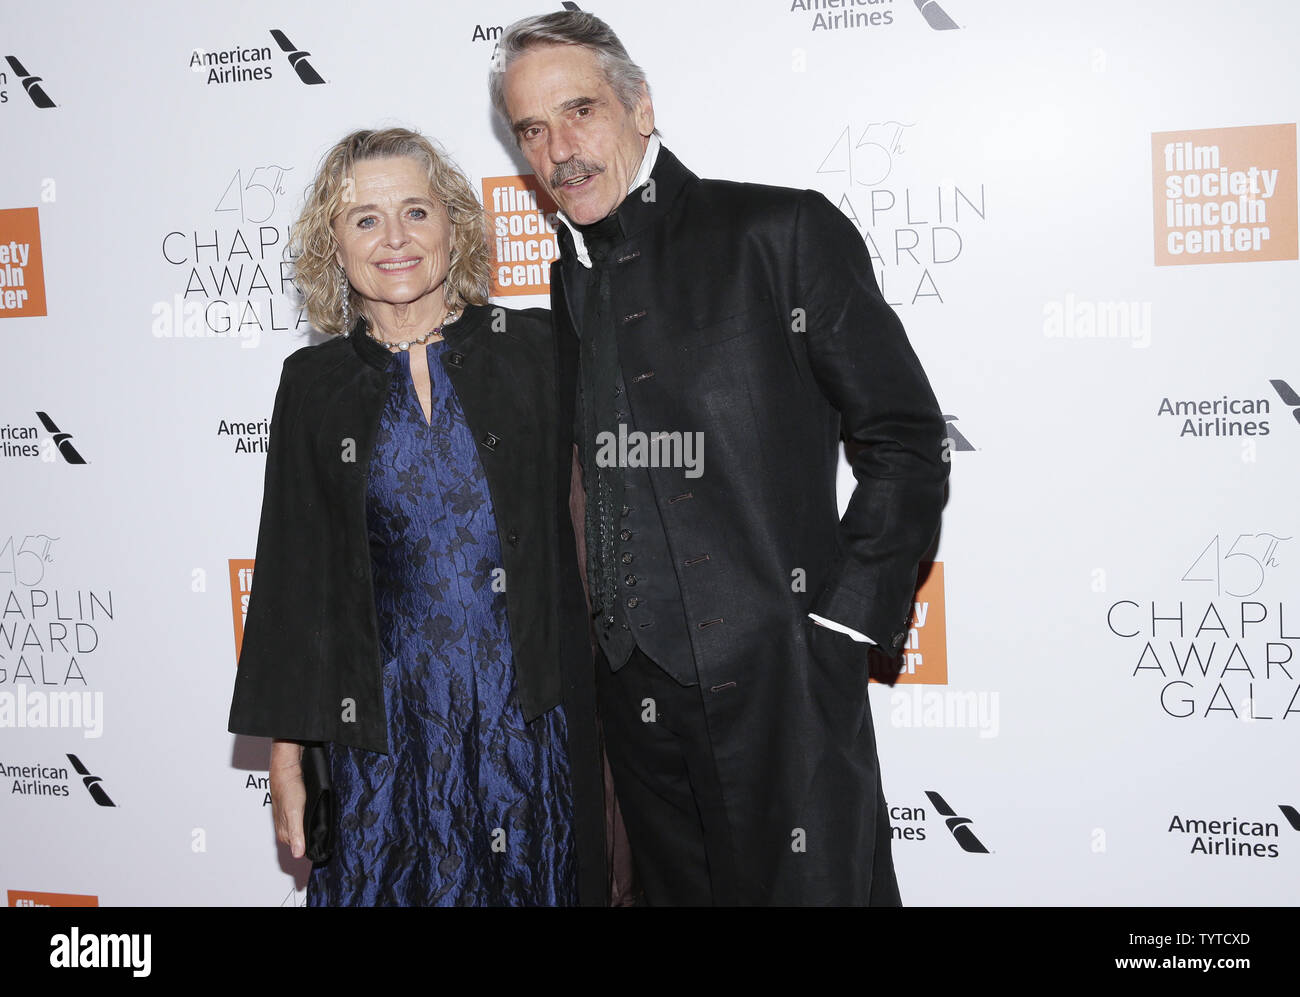 Sinead Cusack and Jeremy Irons arrive on the red carpet at the 45th Chaplin Award Gala at Alice Tully Hall in Lincoln Center on April 30, 2018 in New York City.    Photo by John Angelillo/UPI Stock Photo